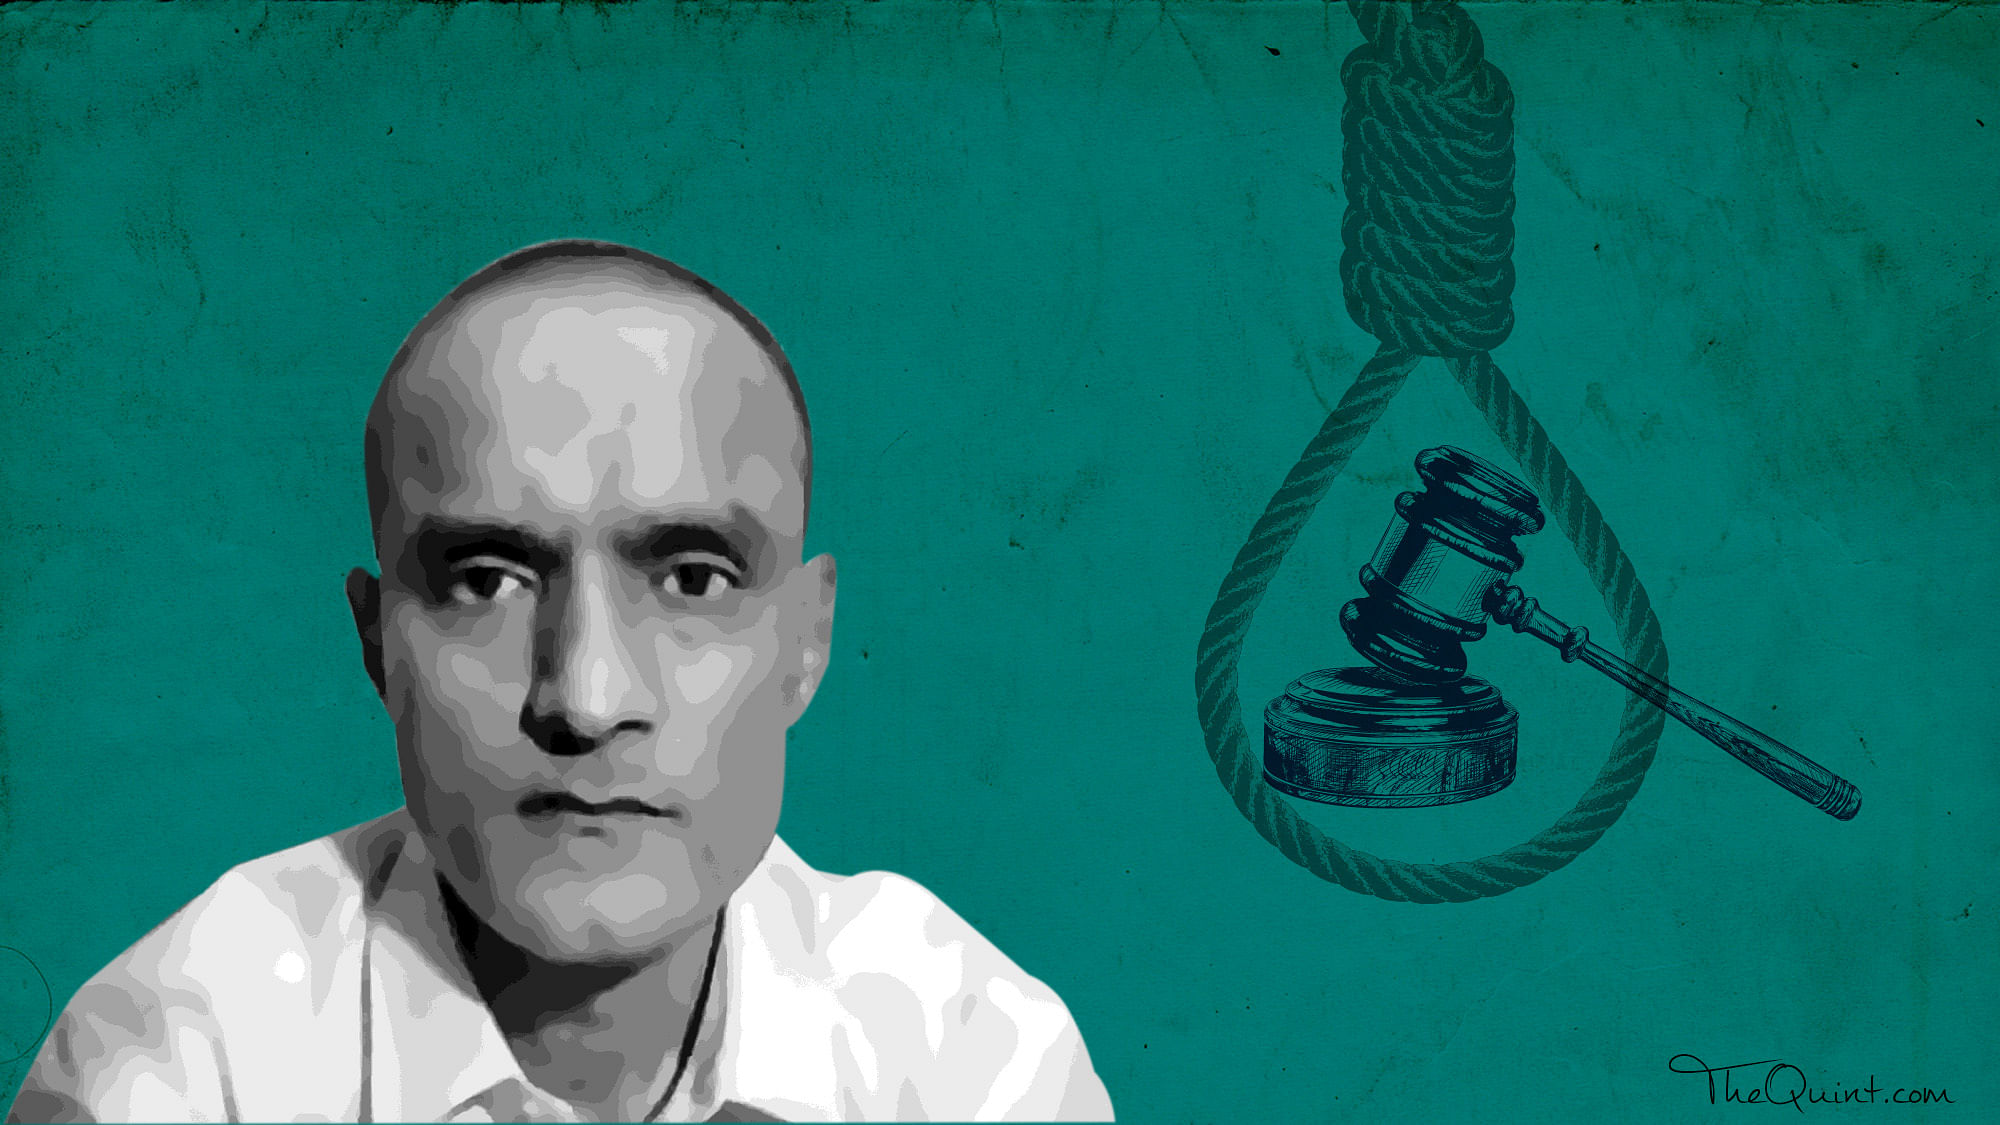 Kulbhushan Jadhav, who Islamabad claims is an Indian spy, was sentenced to death by a Pakistani military court for espionage and engaging. (Photo: The Quint)